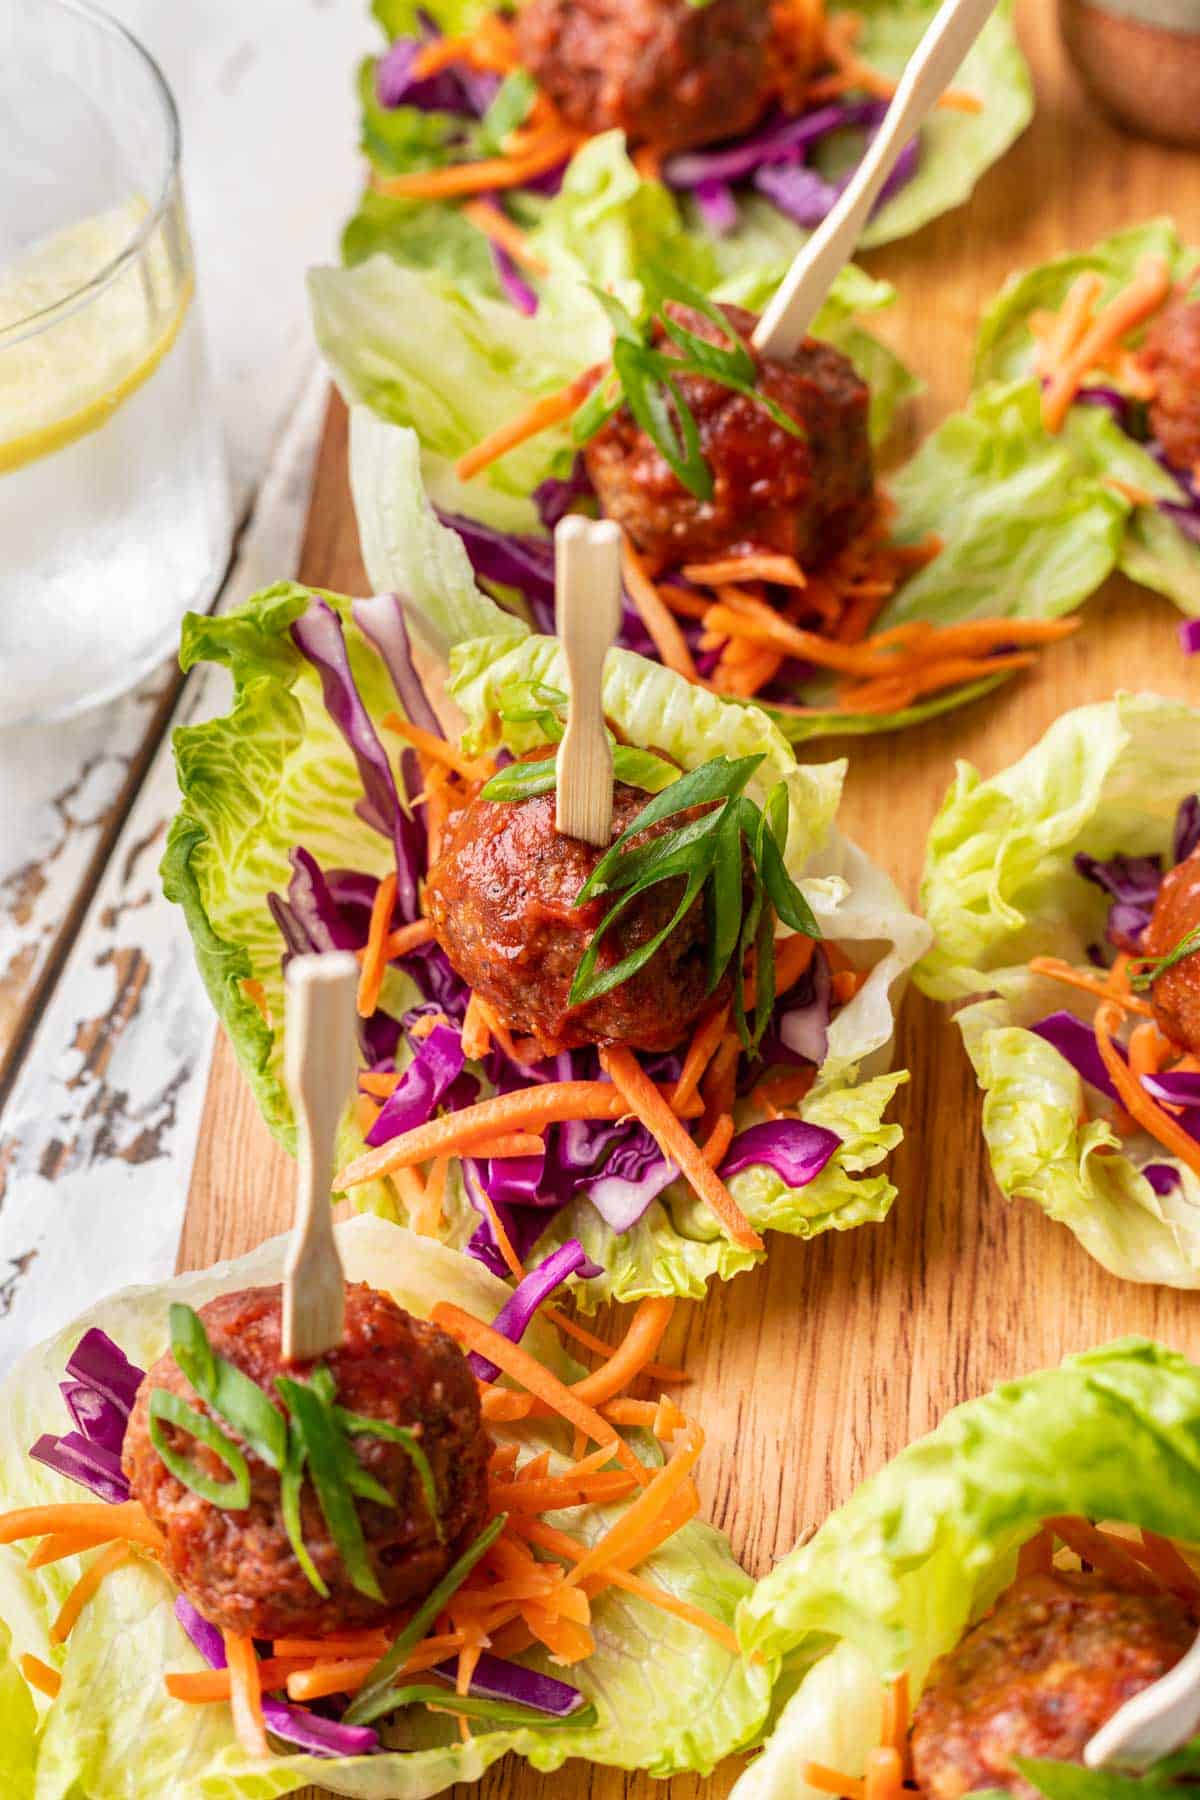 Spicy meatballs assembled on lettuce cups with shredded carrots and purple cabbage.